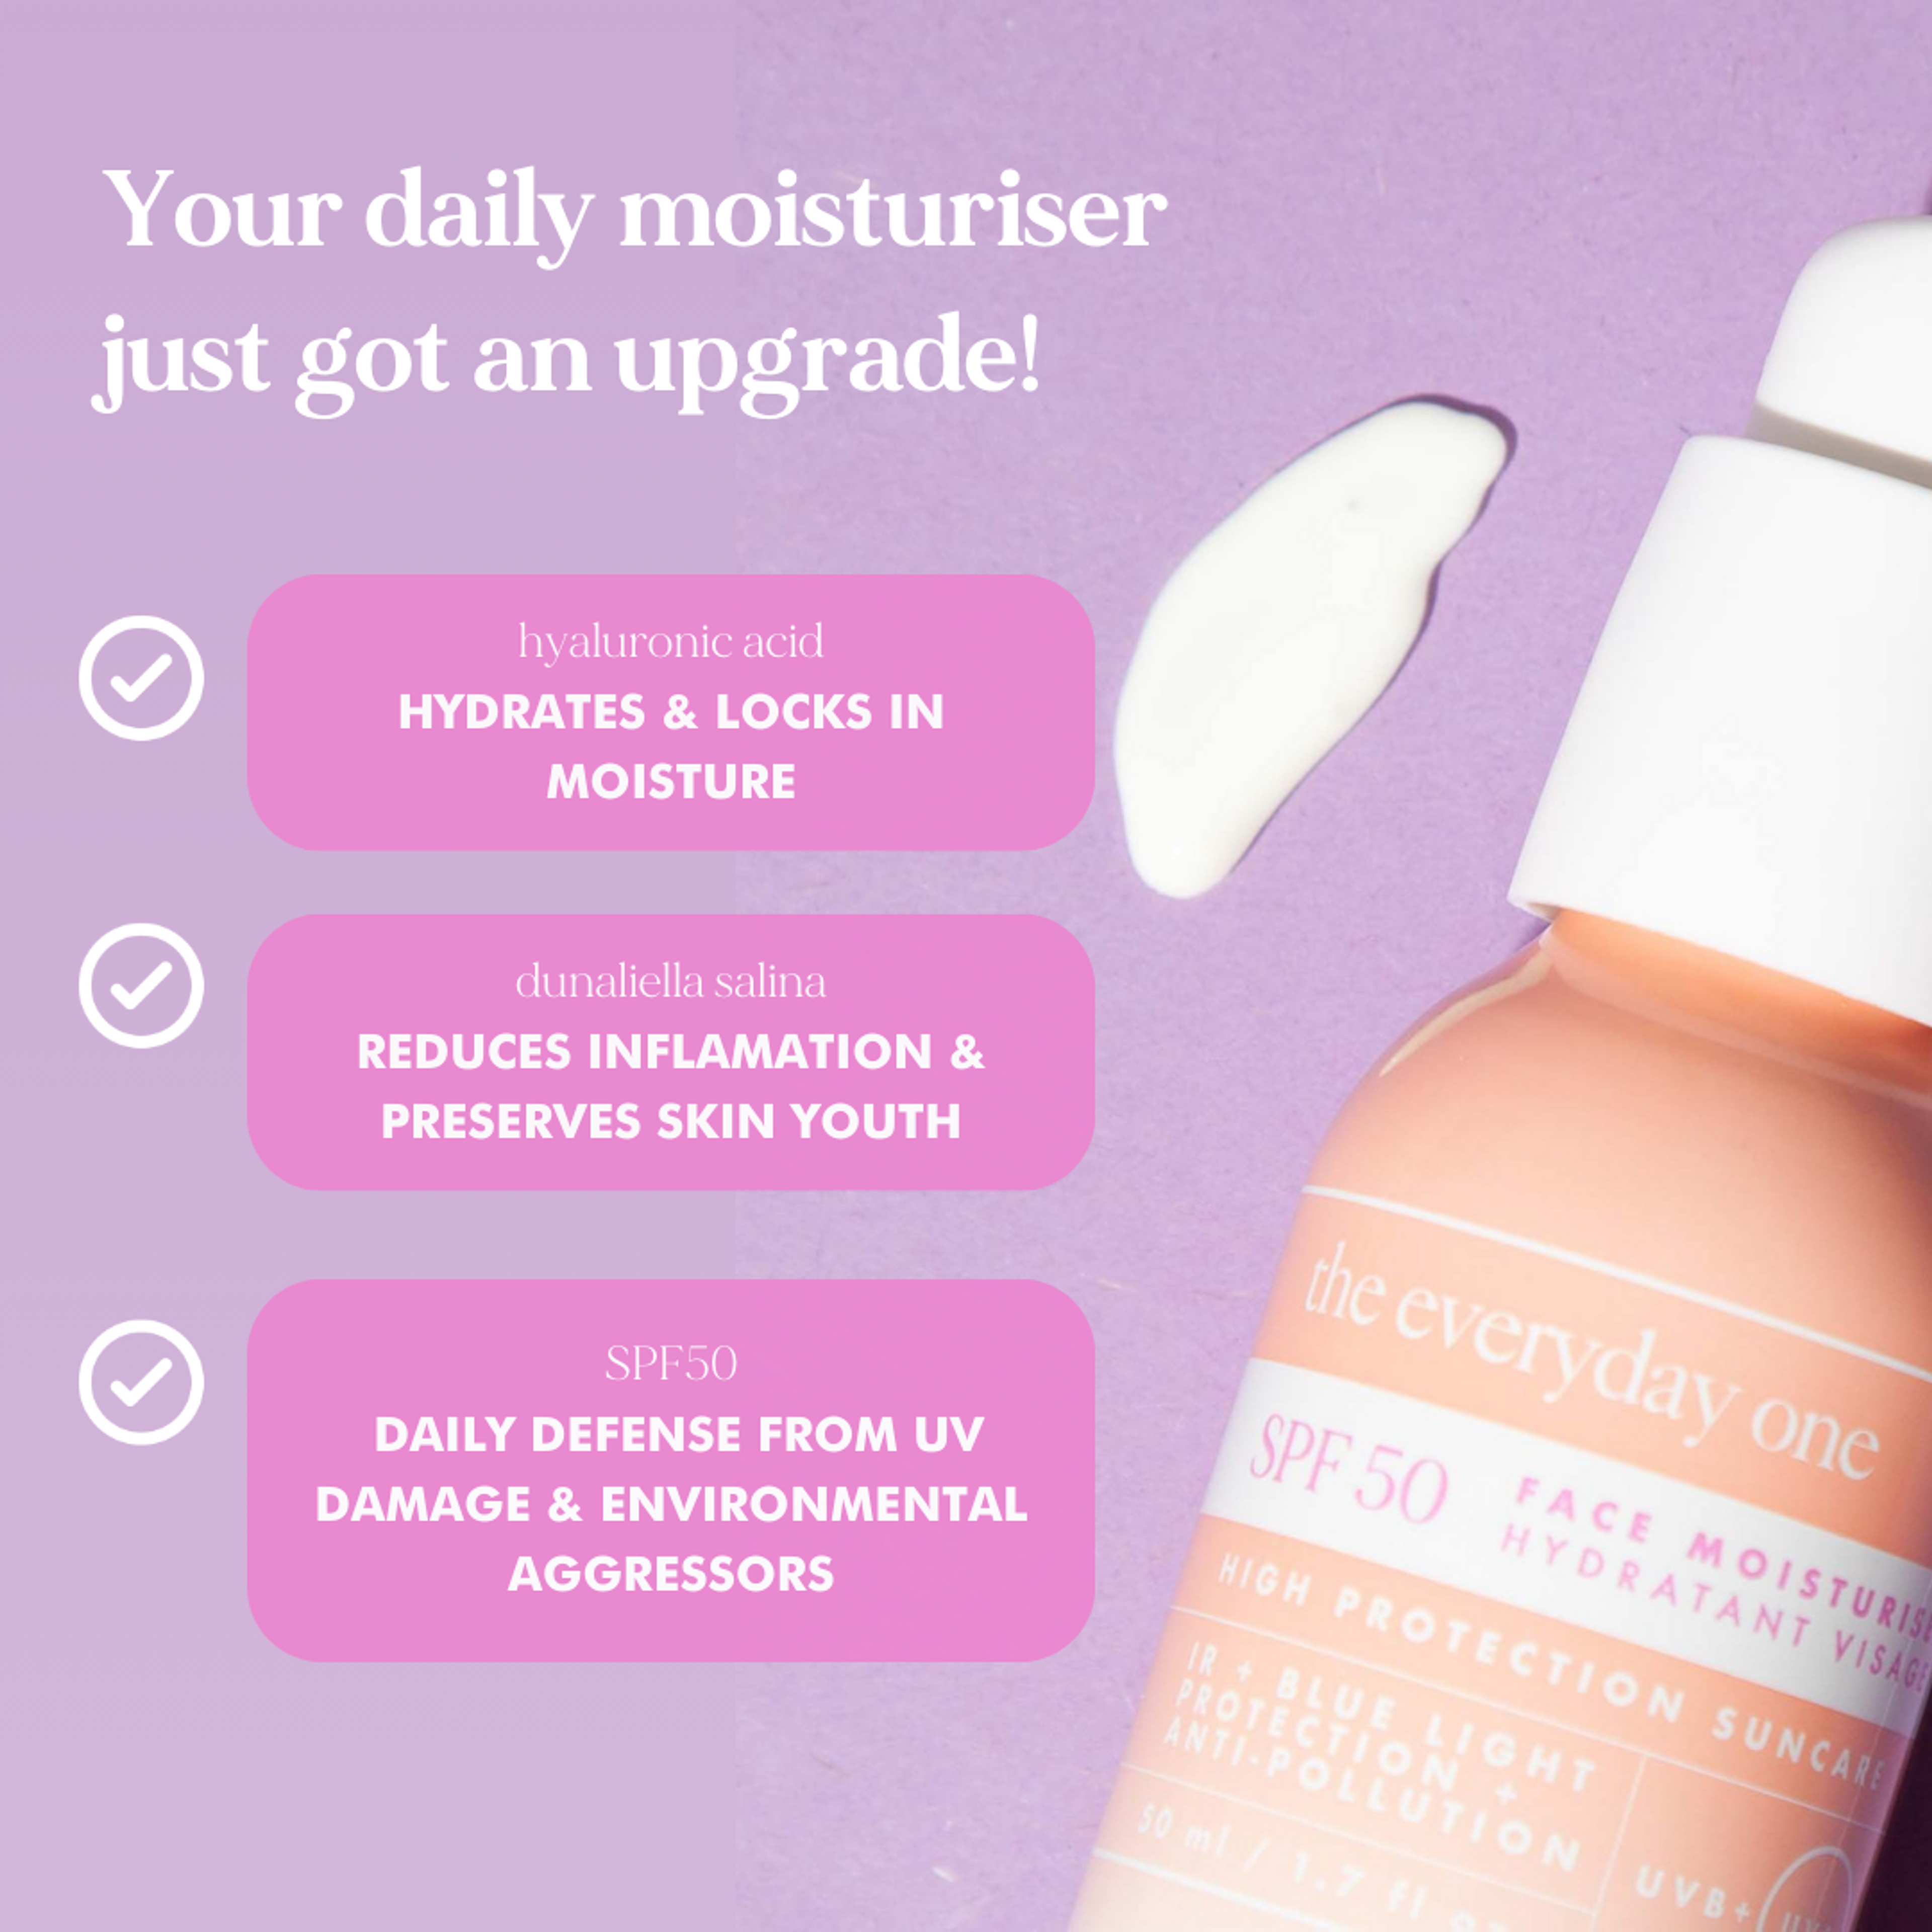 The Everyday One Face Moisturiser SPF 50 with Hyaluronic Acid